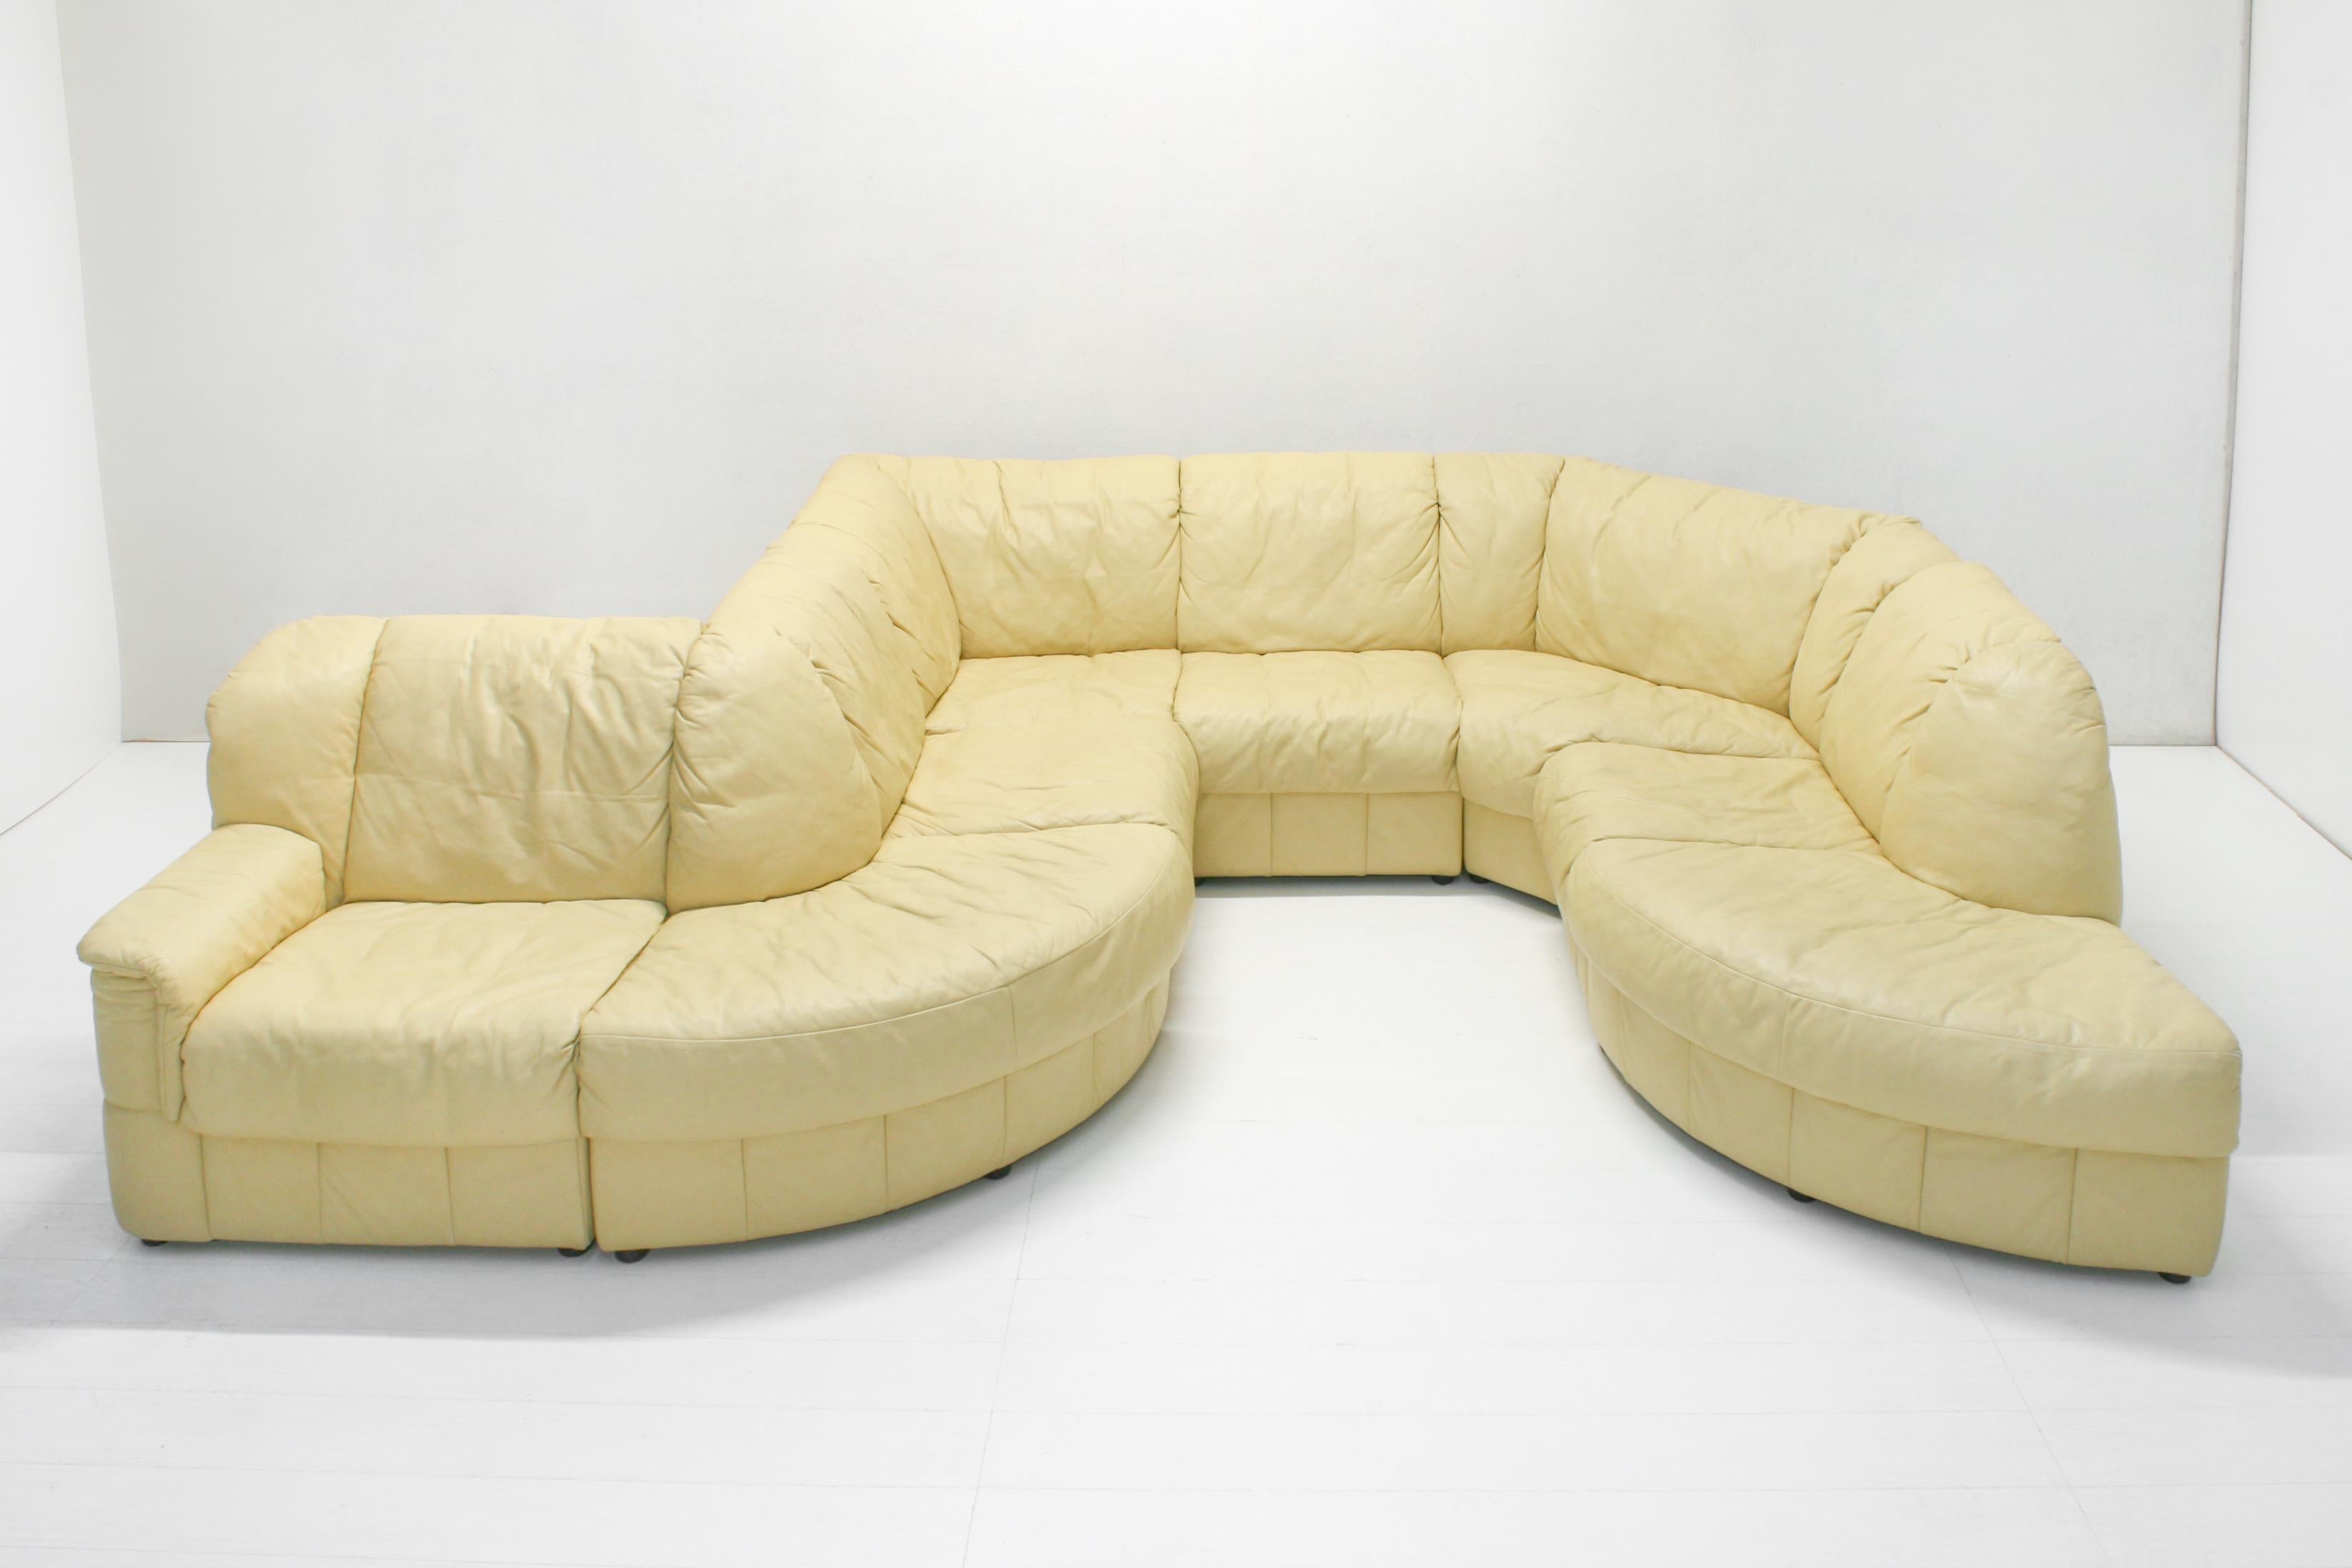 8 Piece Modular Snake Sofa in Yellow Pastel Quilted Leather from Laauser For Sale 1